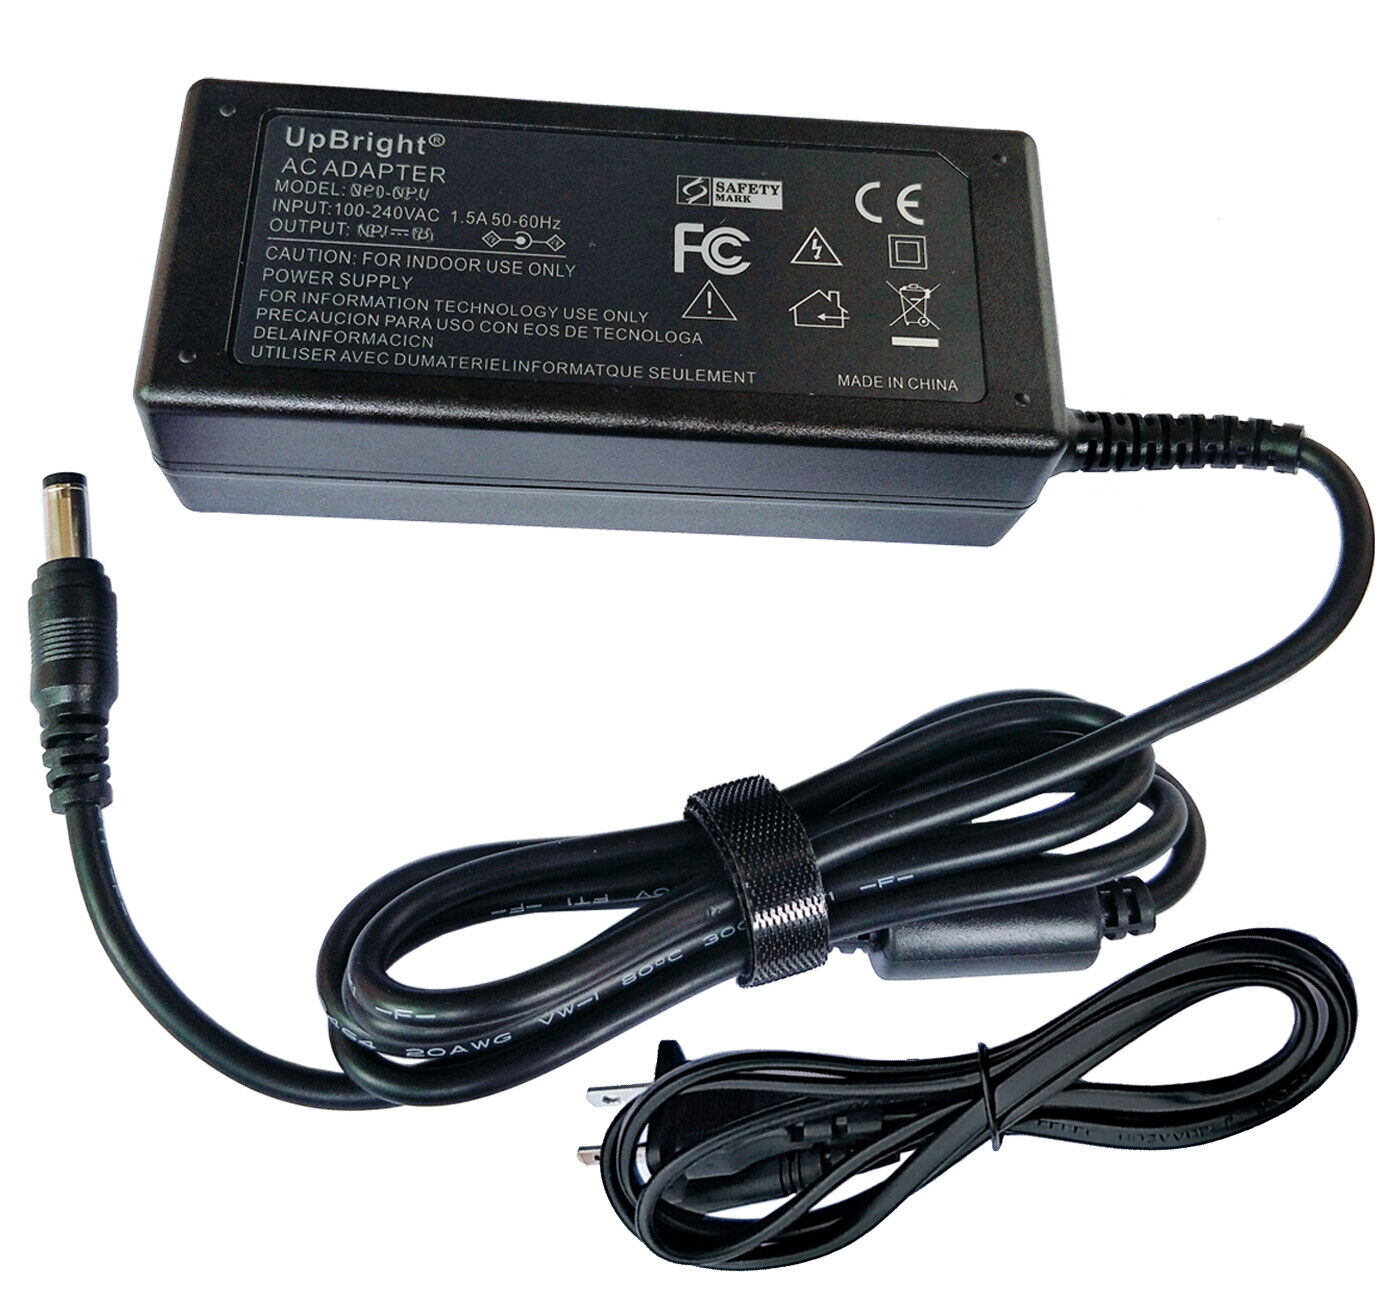 48V AC/DC Adapter For Alacatel-Lucent GPSU15B-8 Power Supply 4018 4028 4038 4068